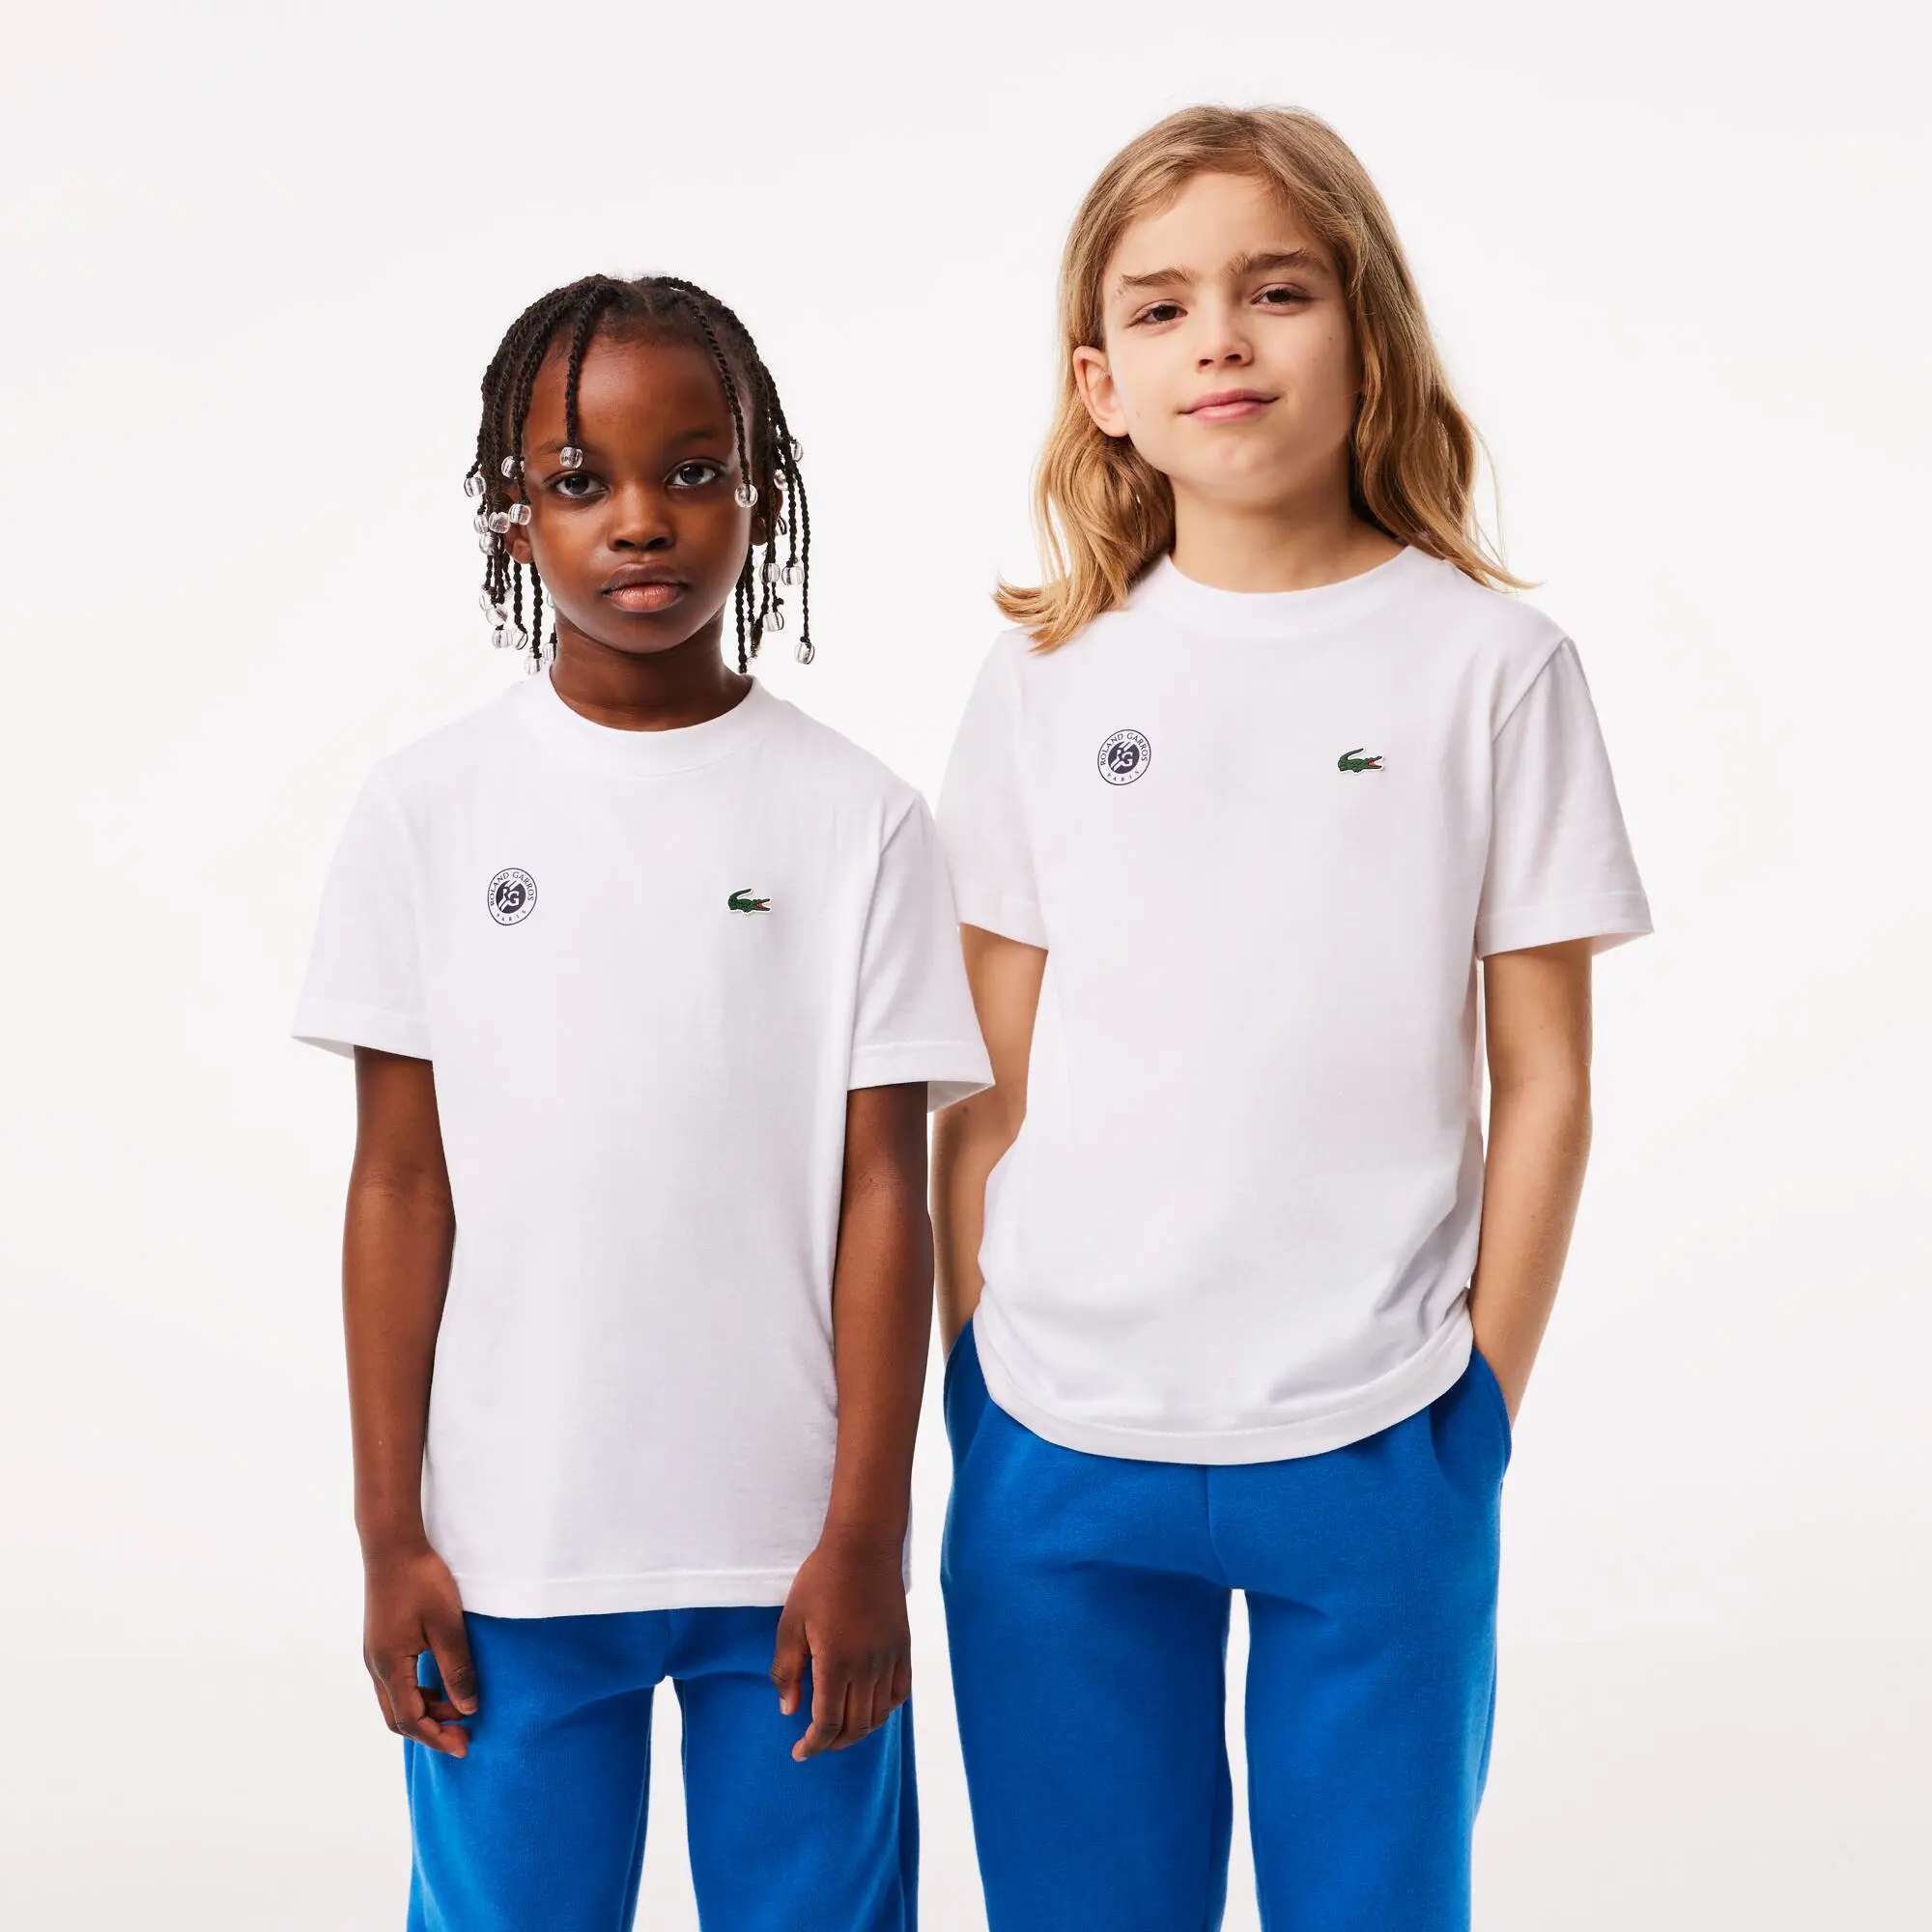 Lacoste T-shirt da bambini in jersey ultra-dry Roland Garros Edition Performance. 1